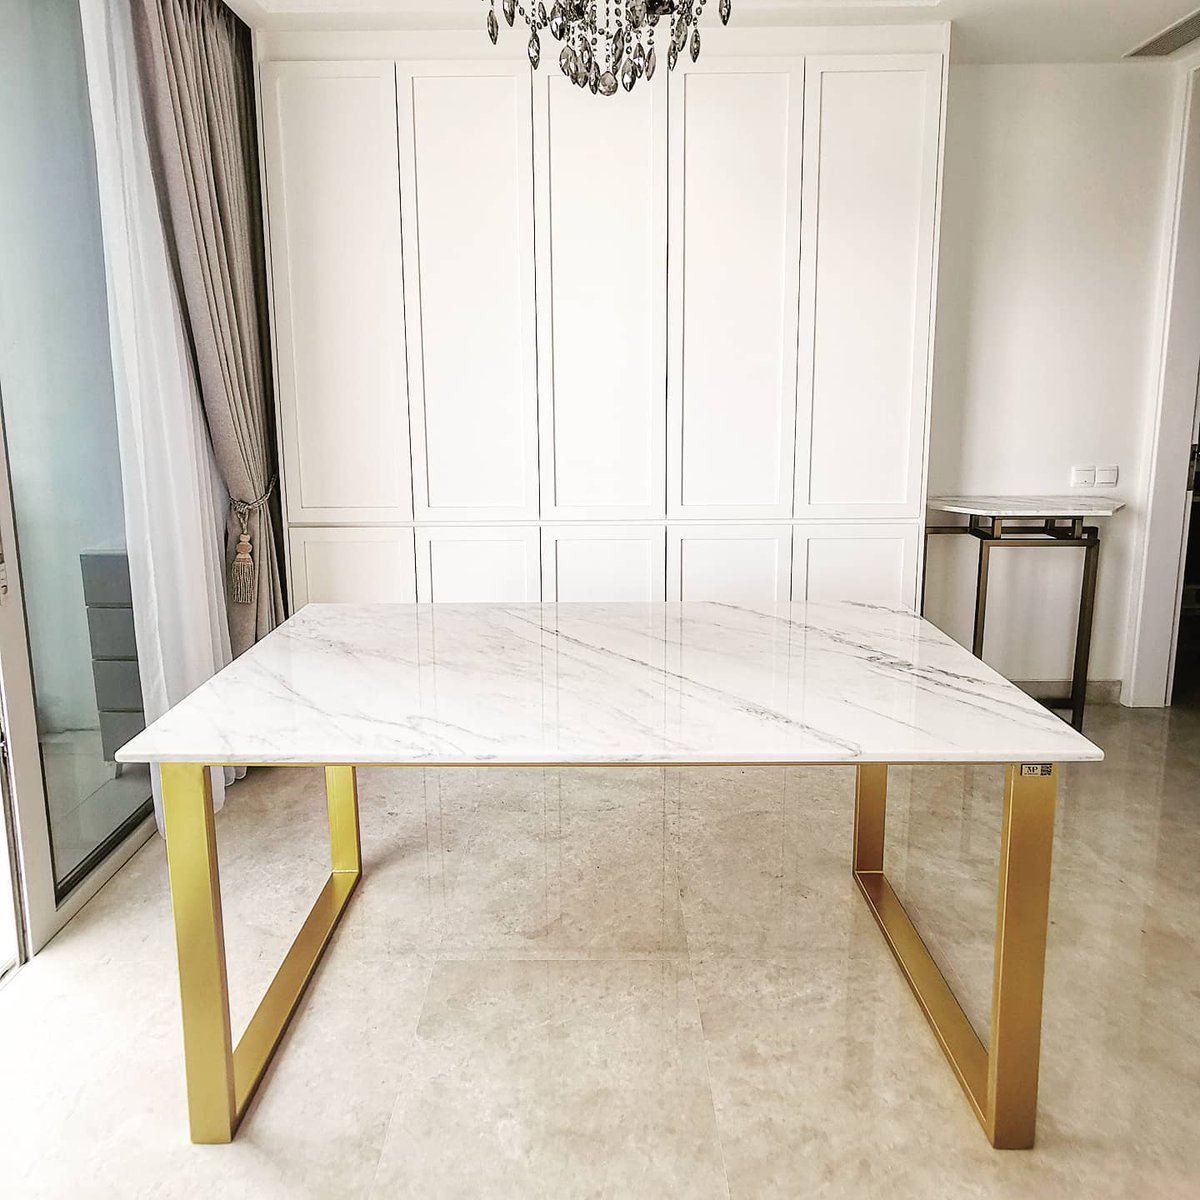 We customised a unique & beautiful piece of Imperial White Marble Top with our Gavino Mettallo Matt Gold Base and it simply looks stunning. What do you think? 😊

#themarblepeople #marblefurniture #marble #marblediningtable #marblesingapore #marblecollection #naturalmarble